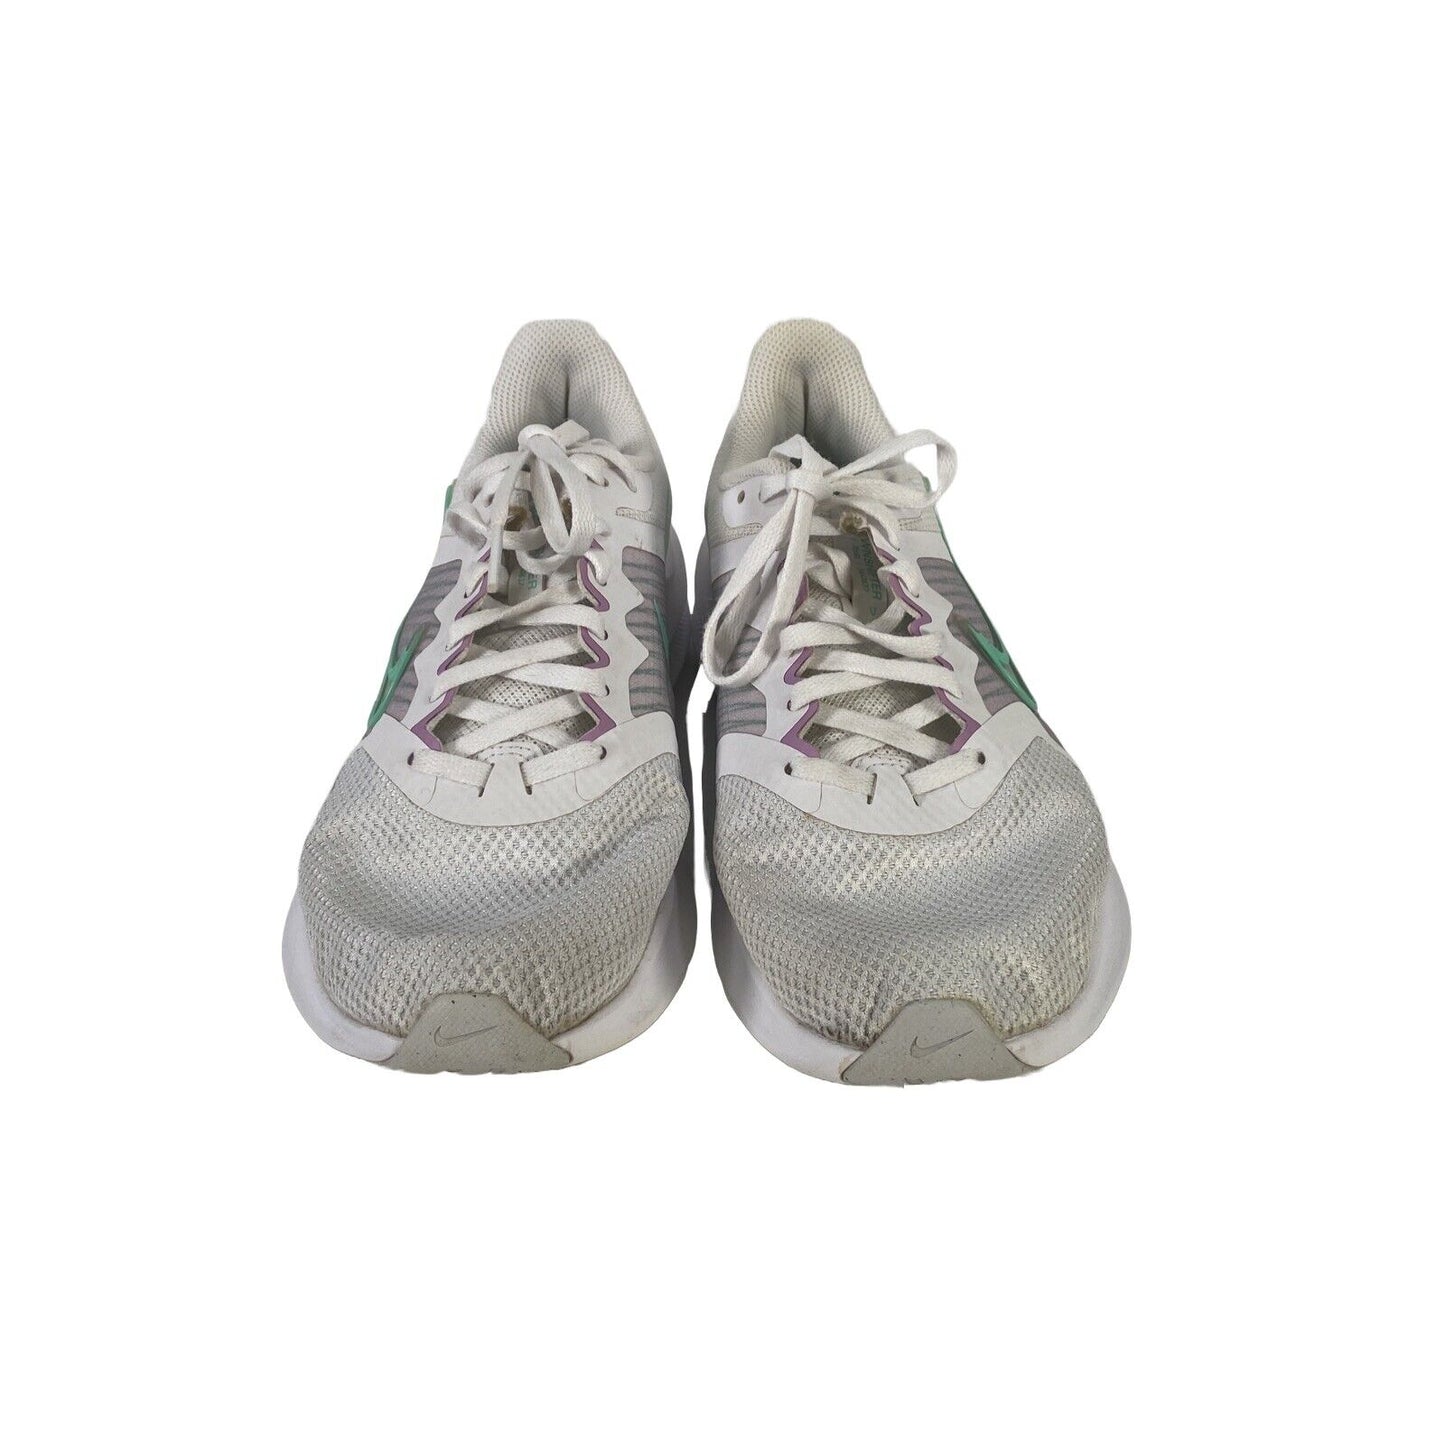 Nike Women's White Downshifter 11 Lace Up CW3413 Running Shoes - 9